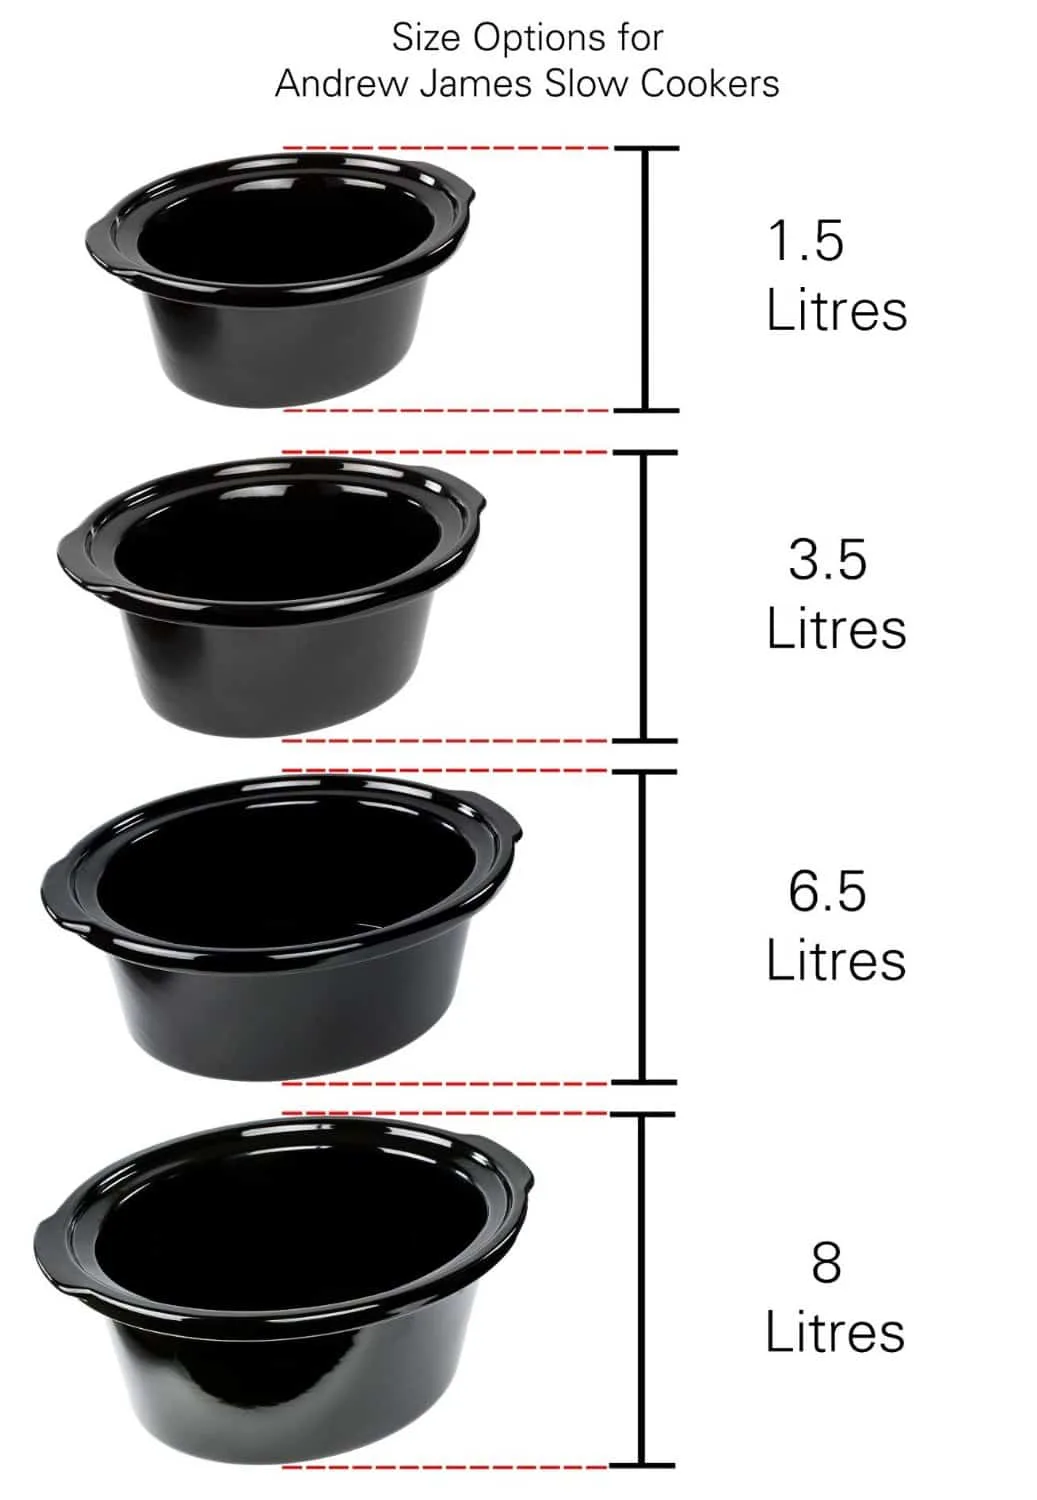 Andrew James Slow Cooker Sizes